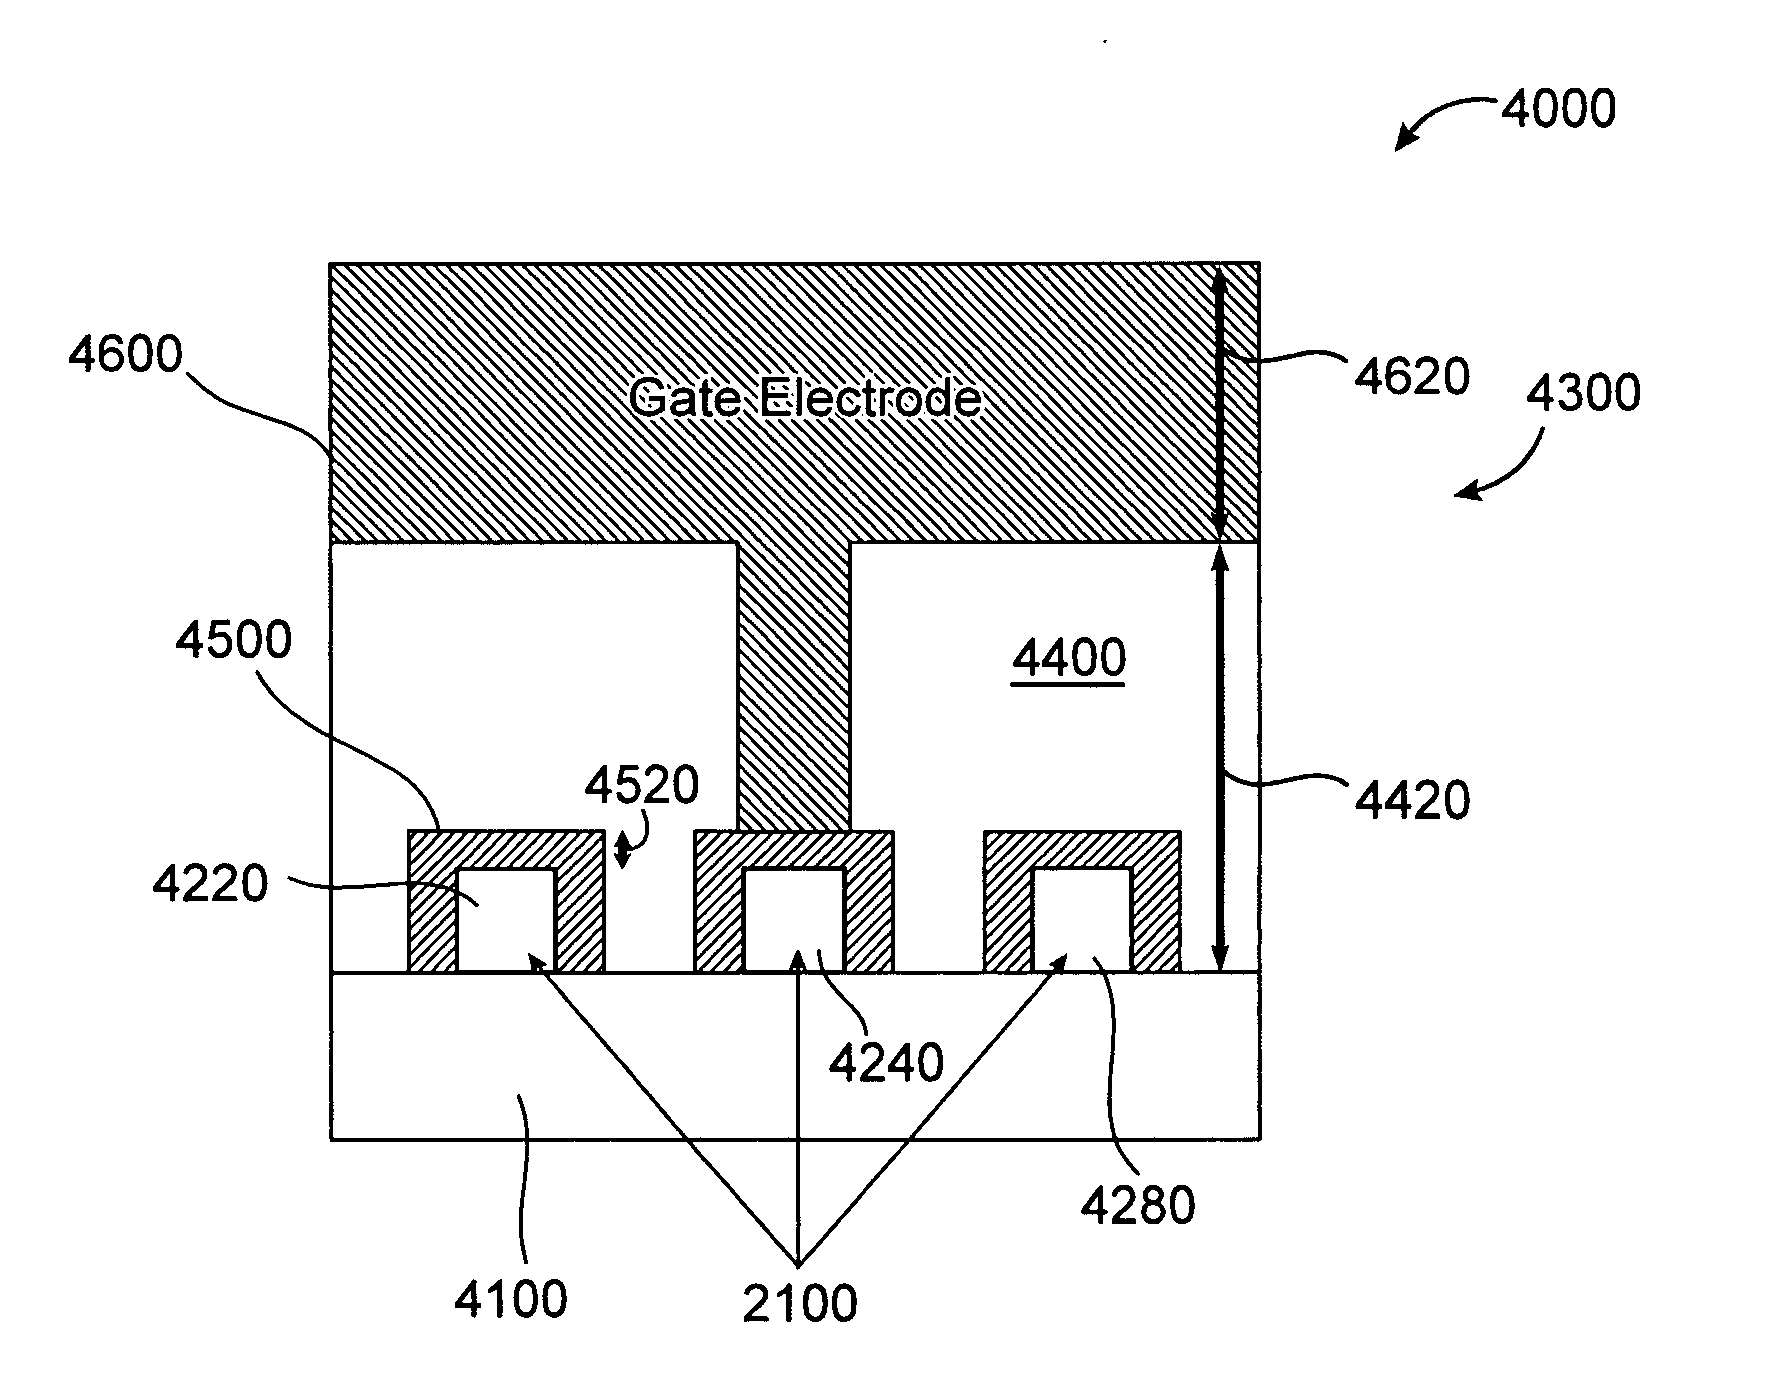 System and method based on field-effect transistors for addressing nanometer-scale devices